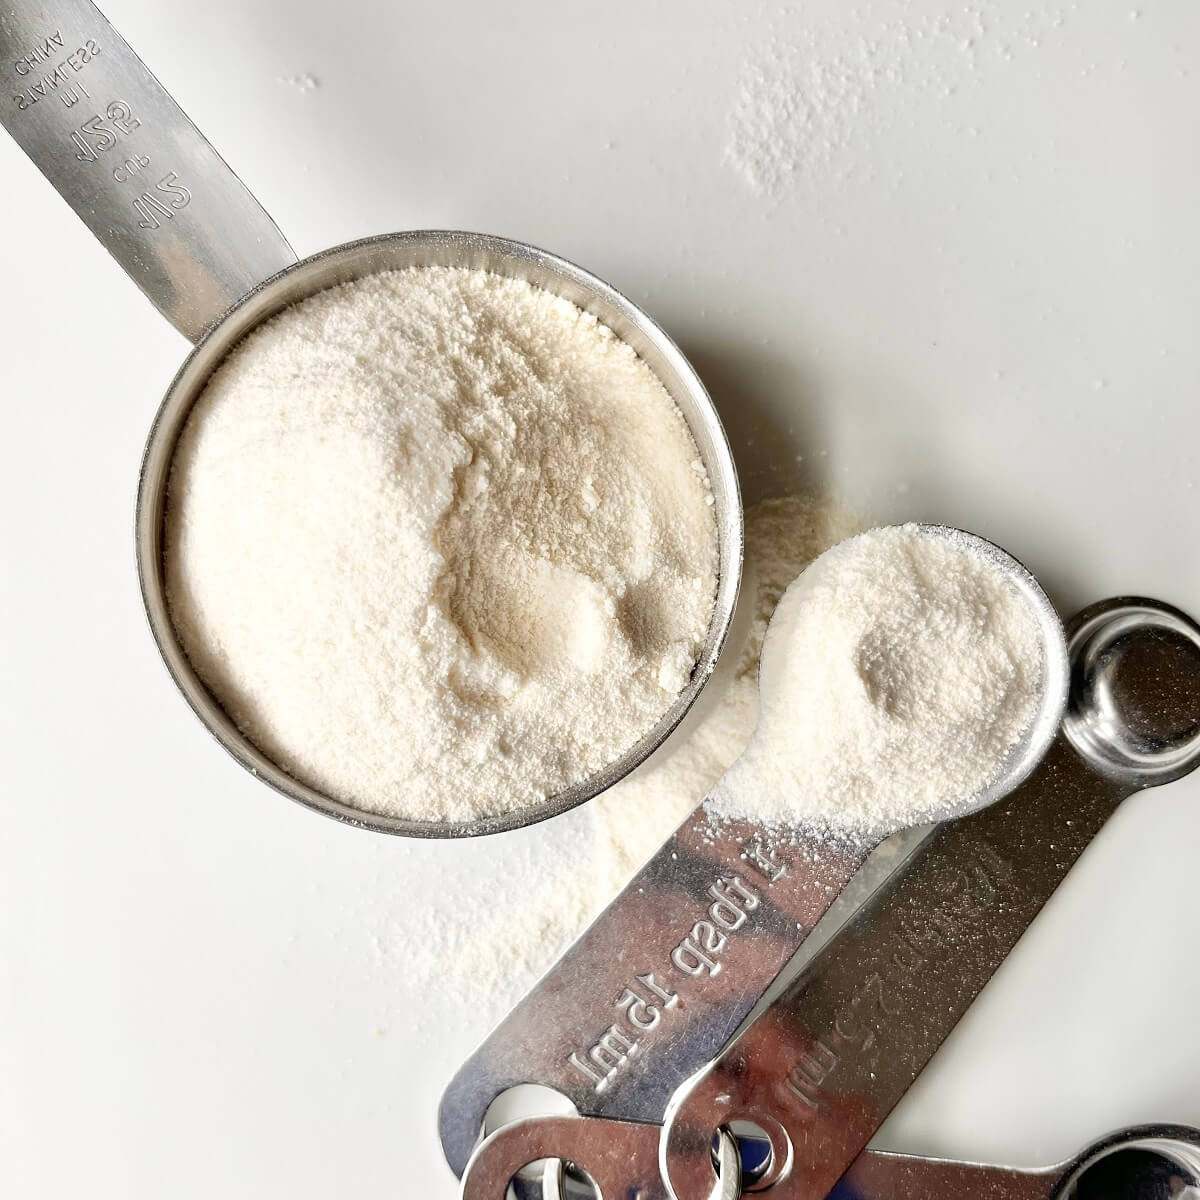 A measuring cup and spoons filed with high fiber coconut flour.